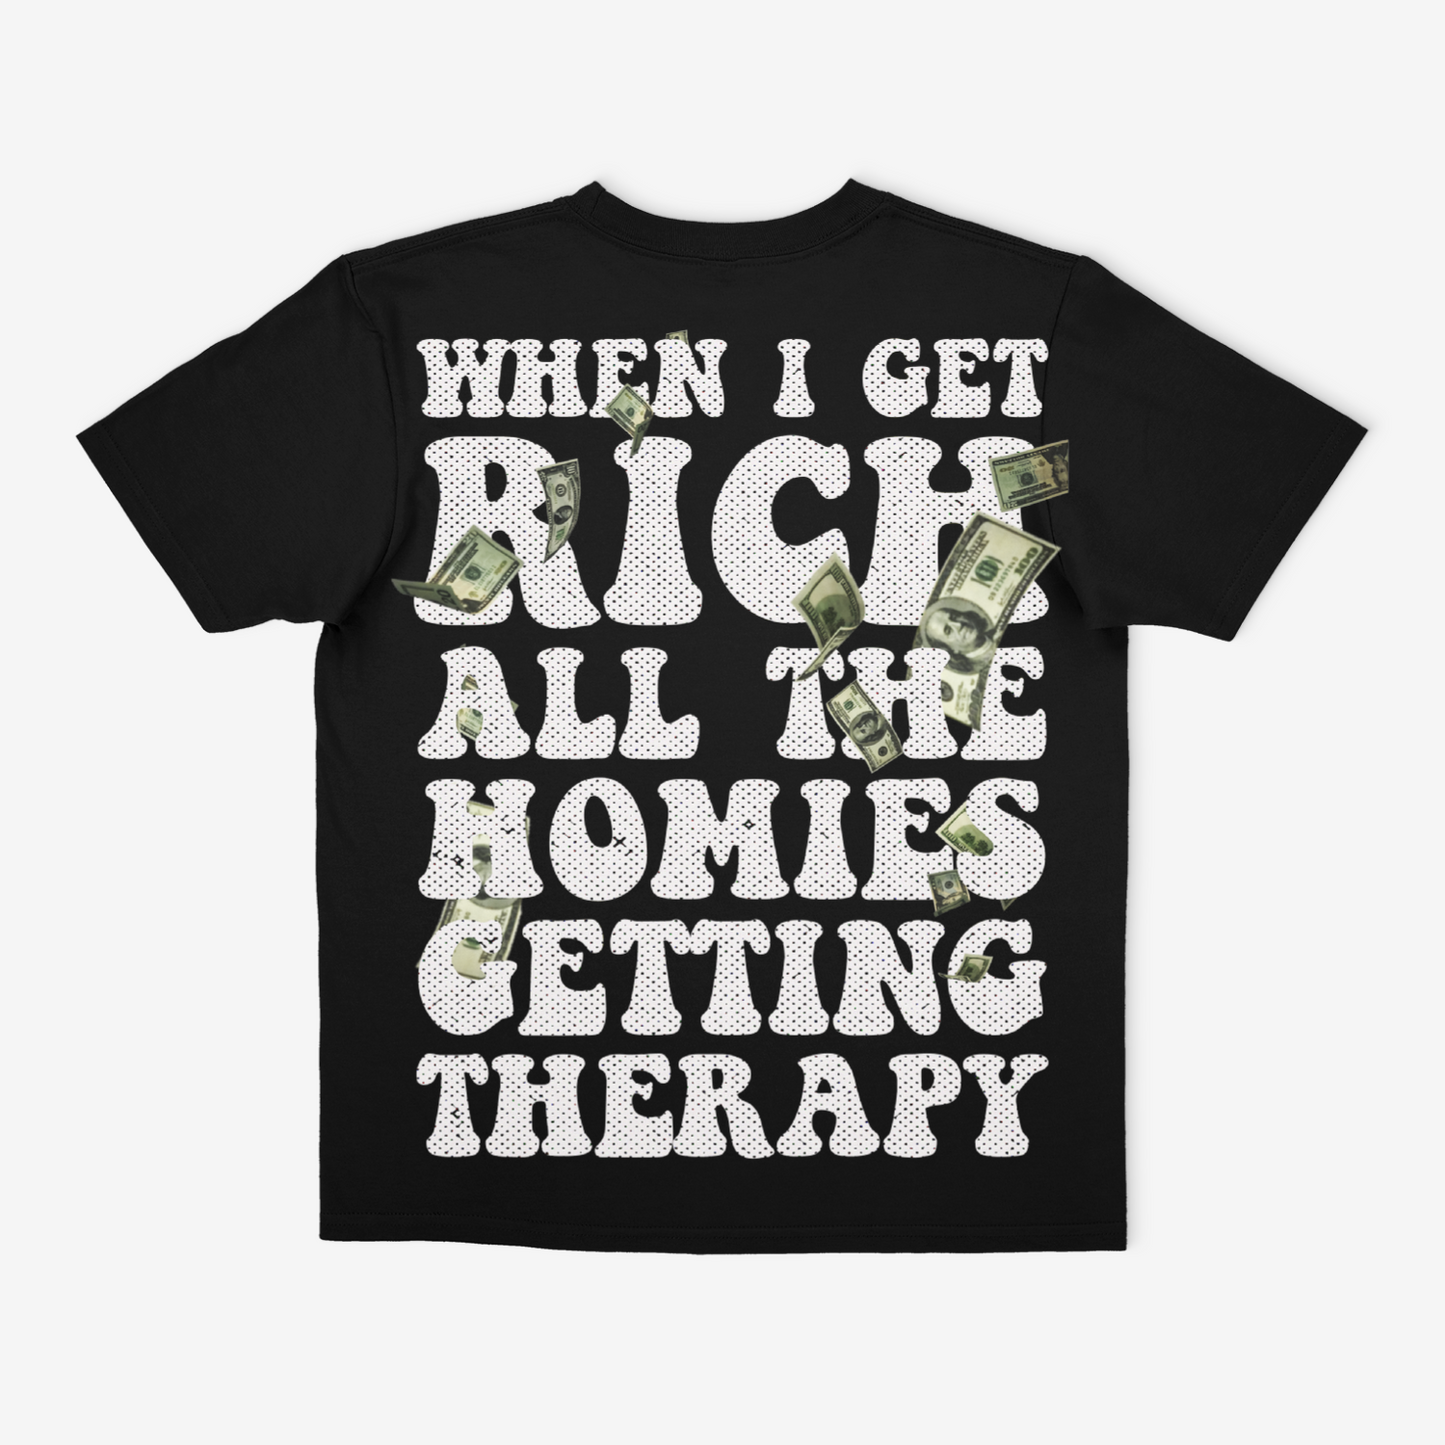 When I Get Rich All The Homies Getting Therapy | T - Shirt